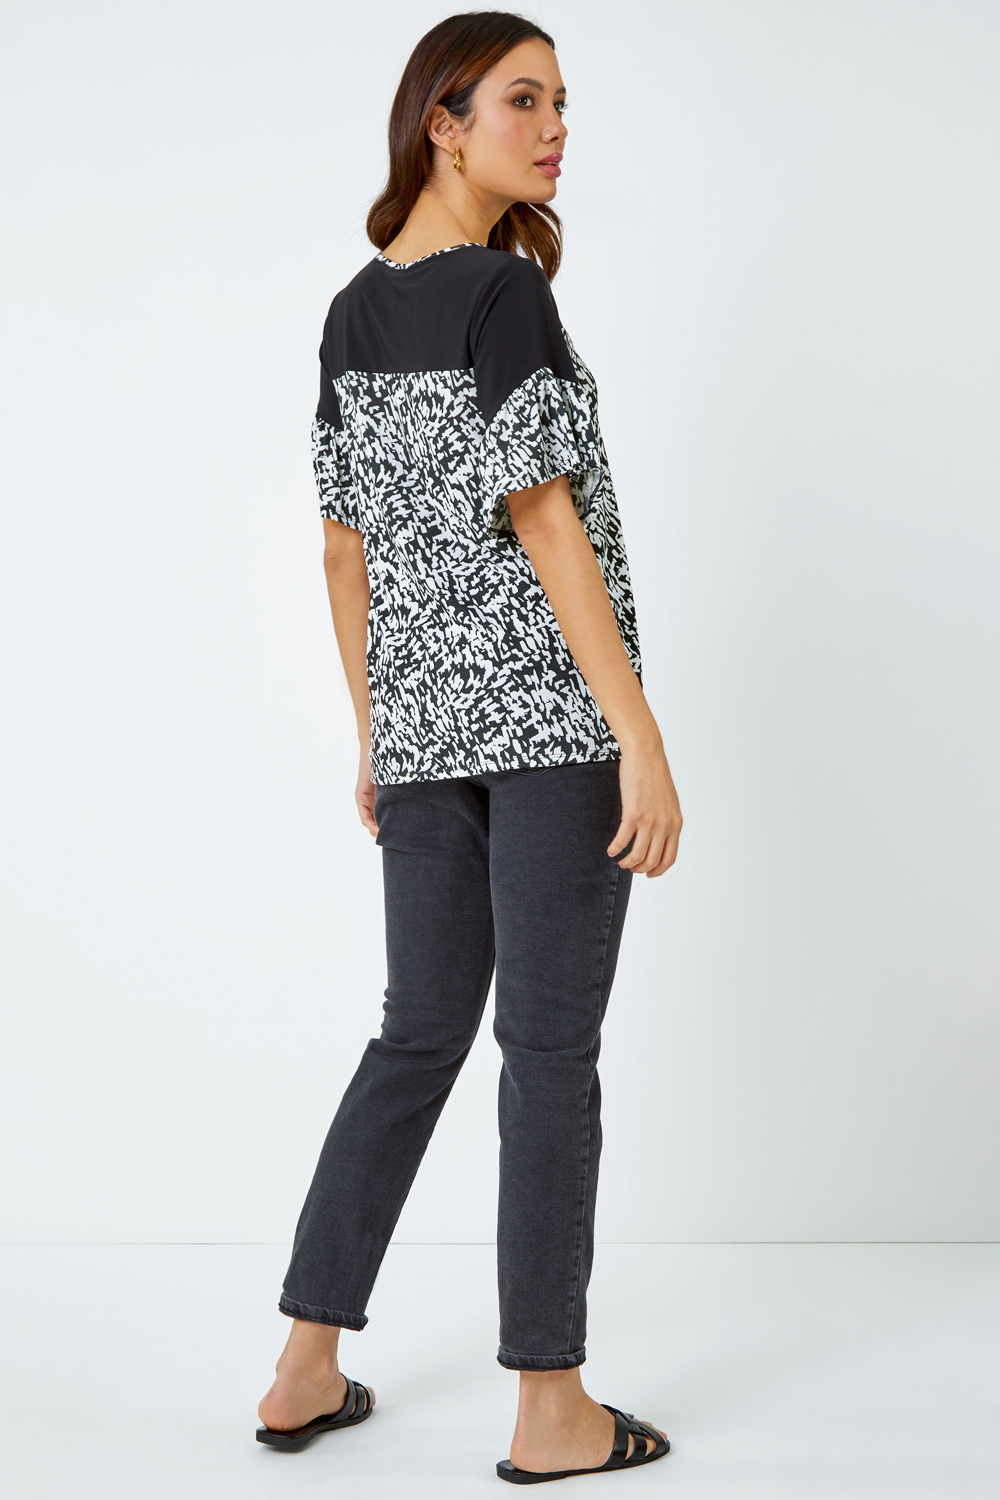 Black Contrast Frill Sleeve T-Shirt, Image 3 of 5